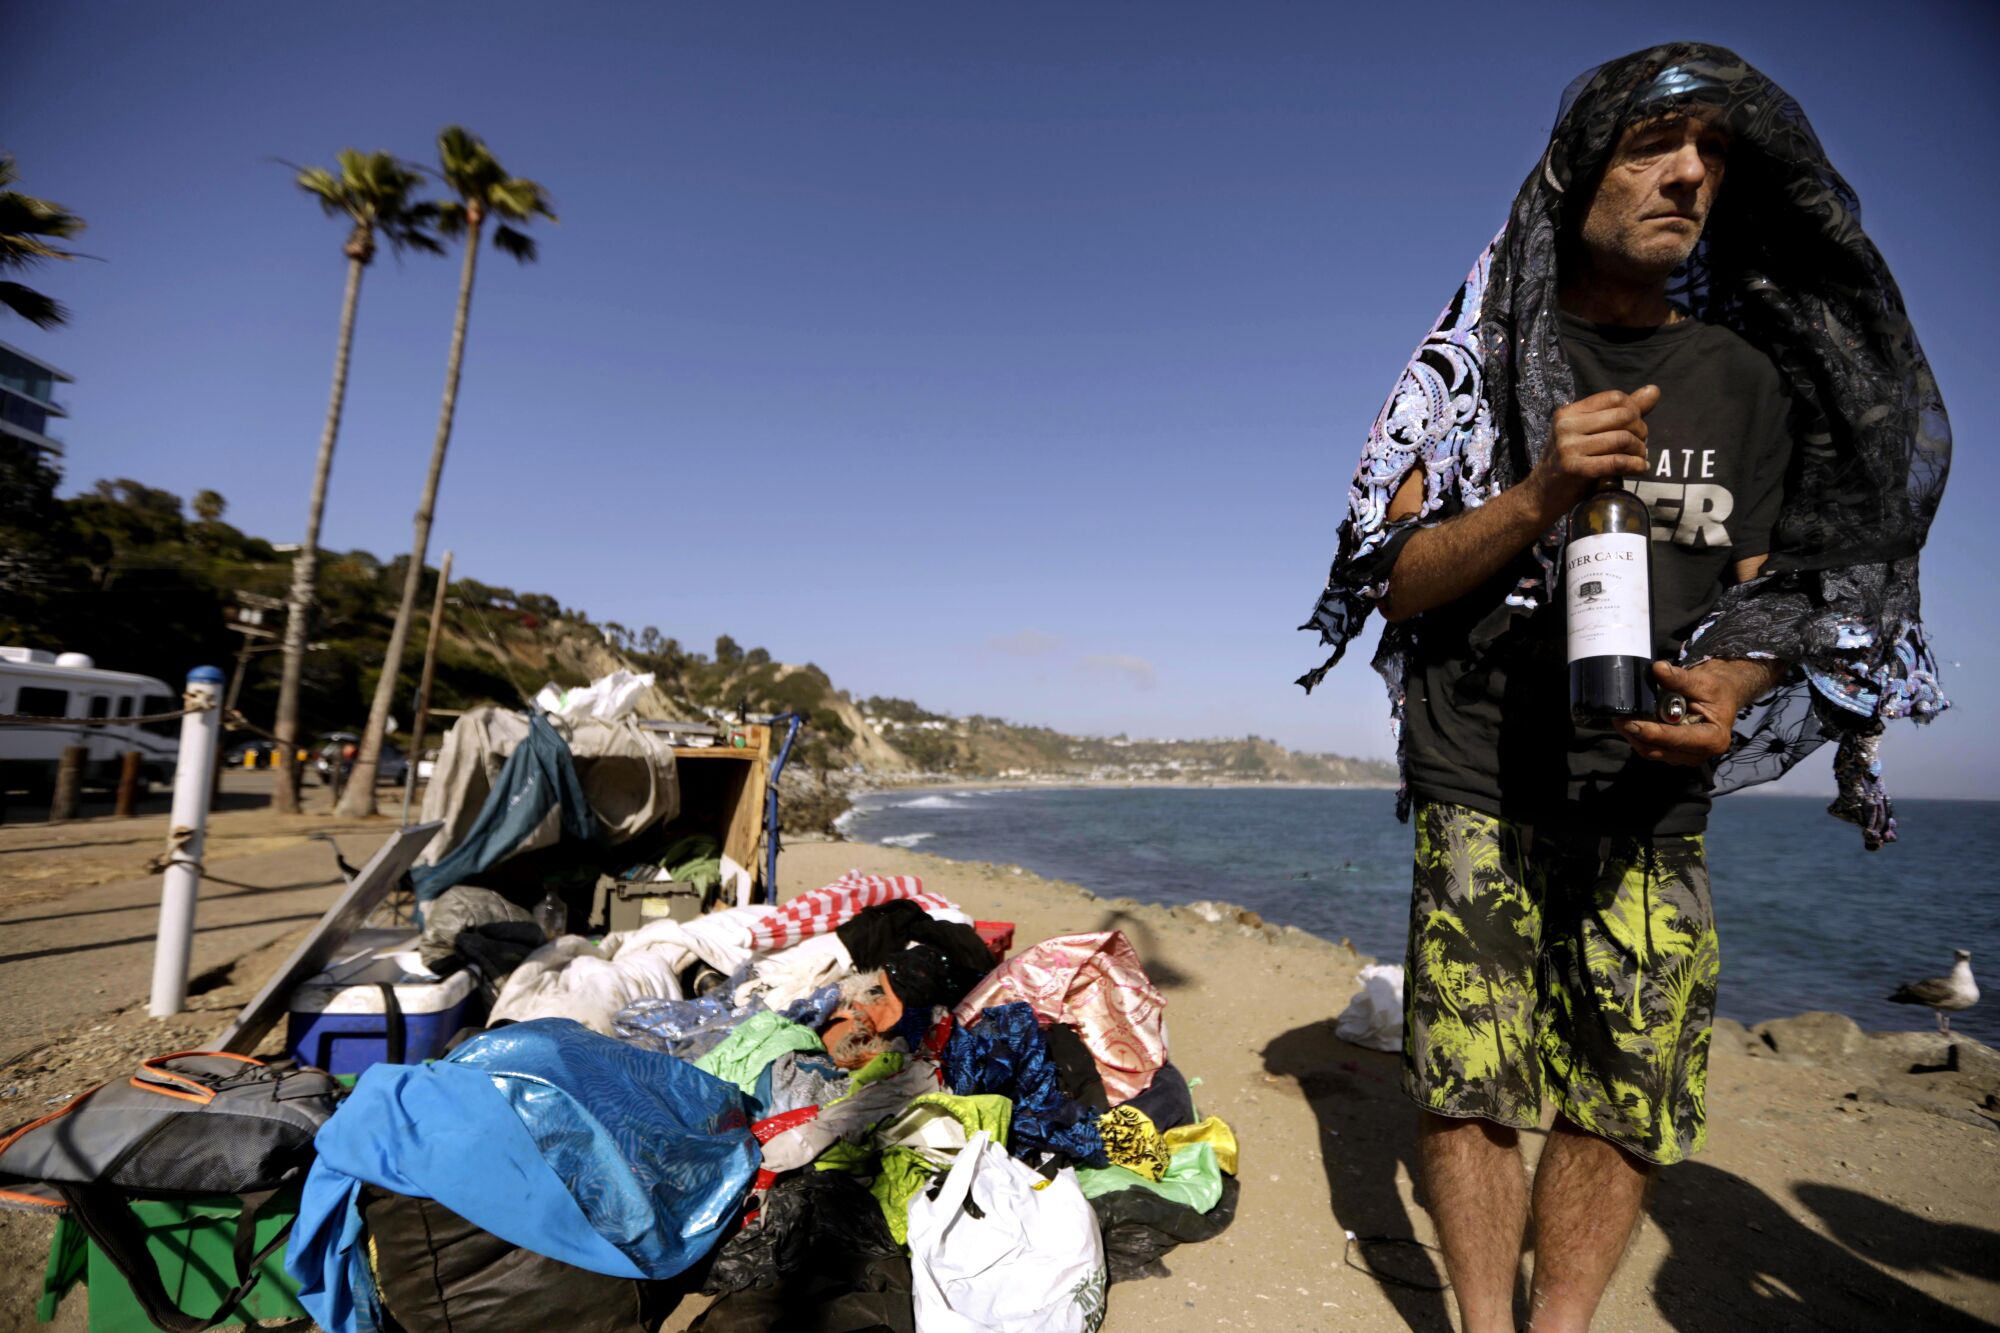 A homeless man in Pacific Palisades